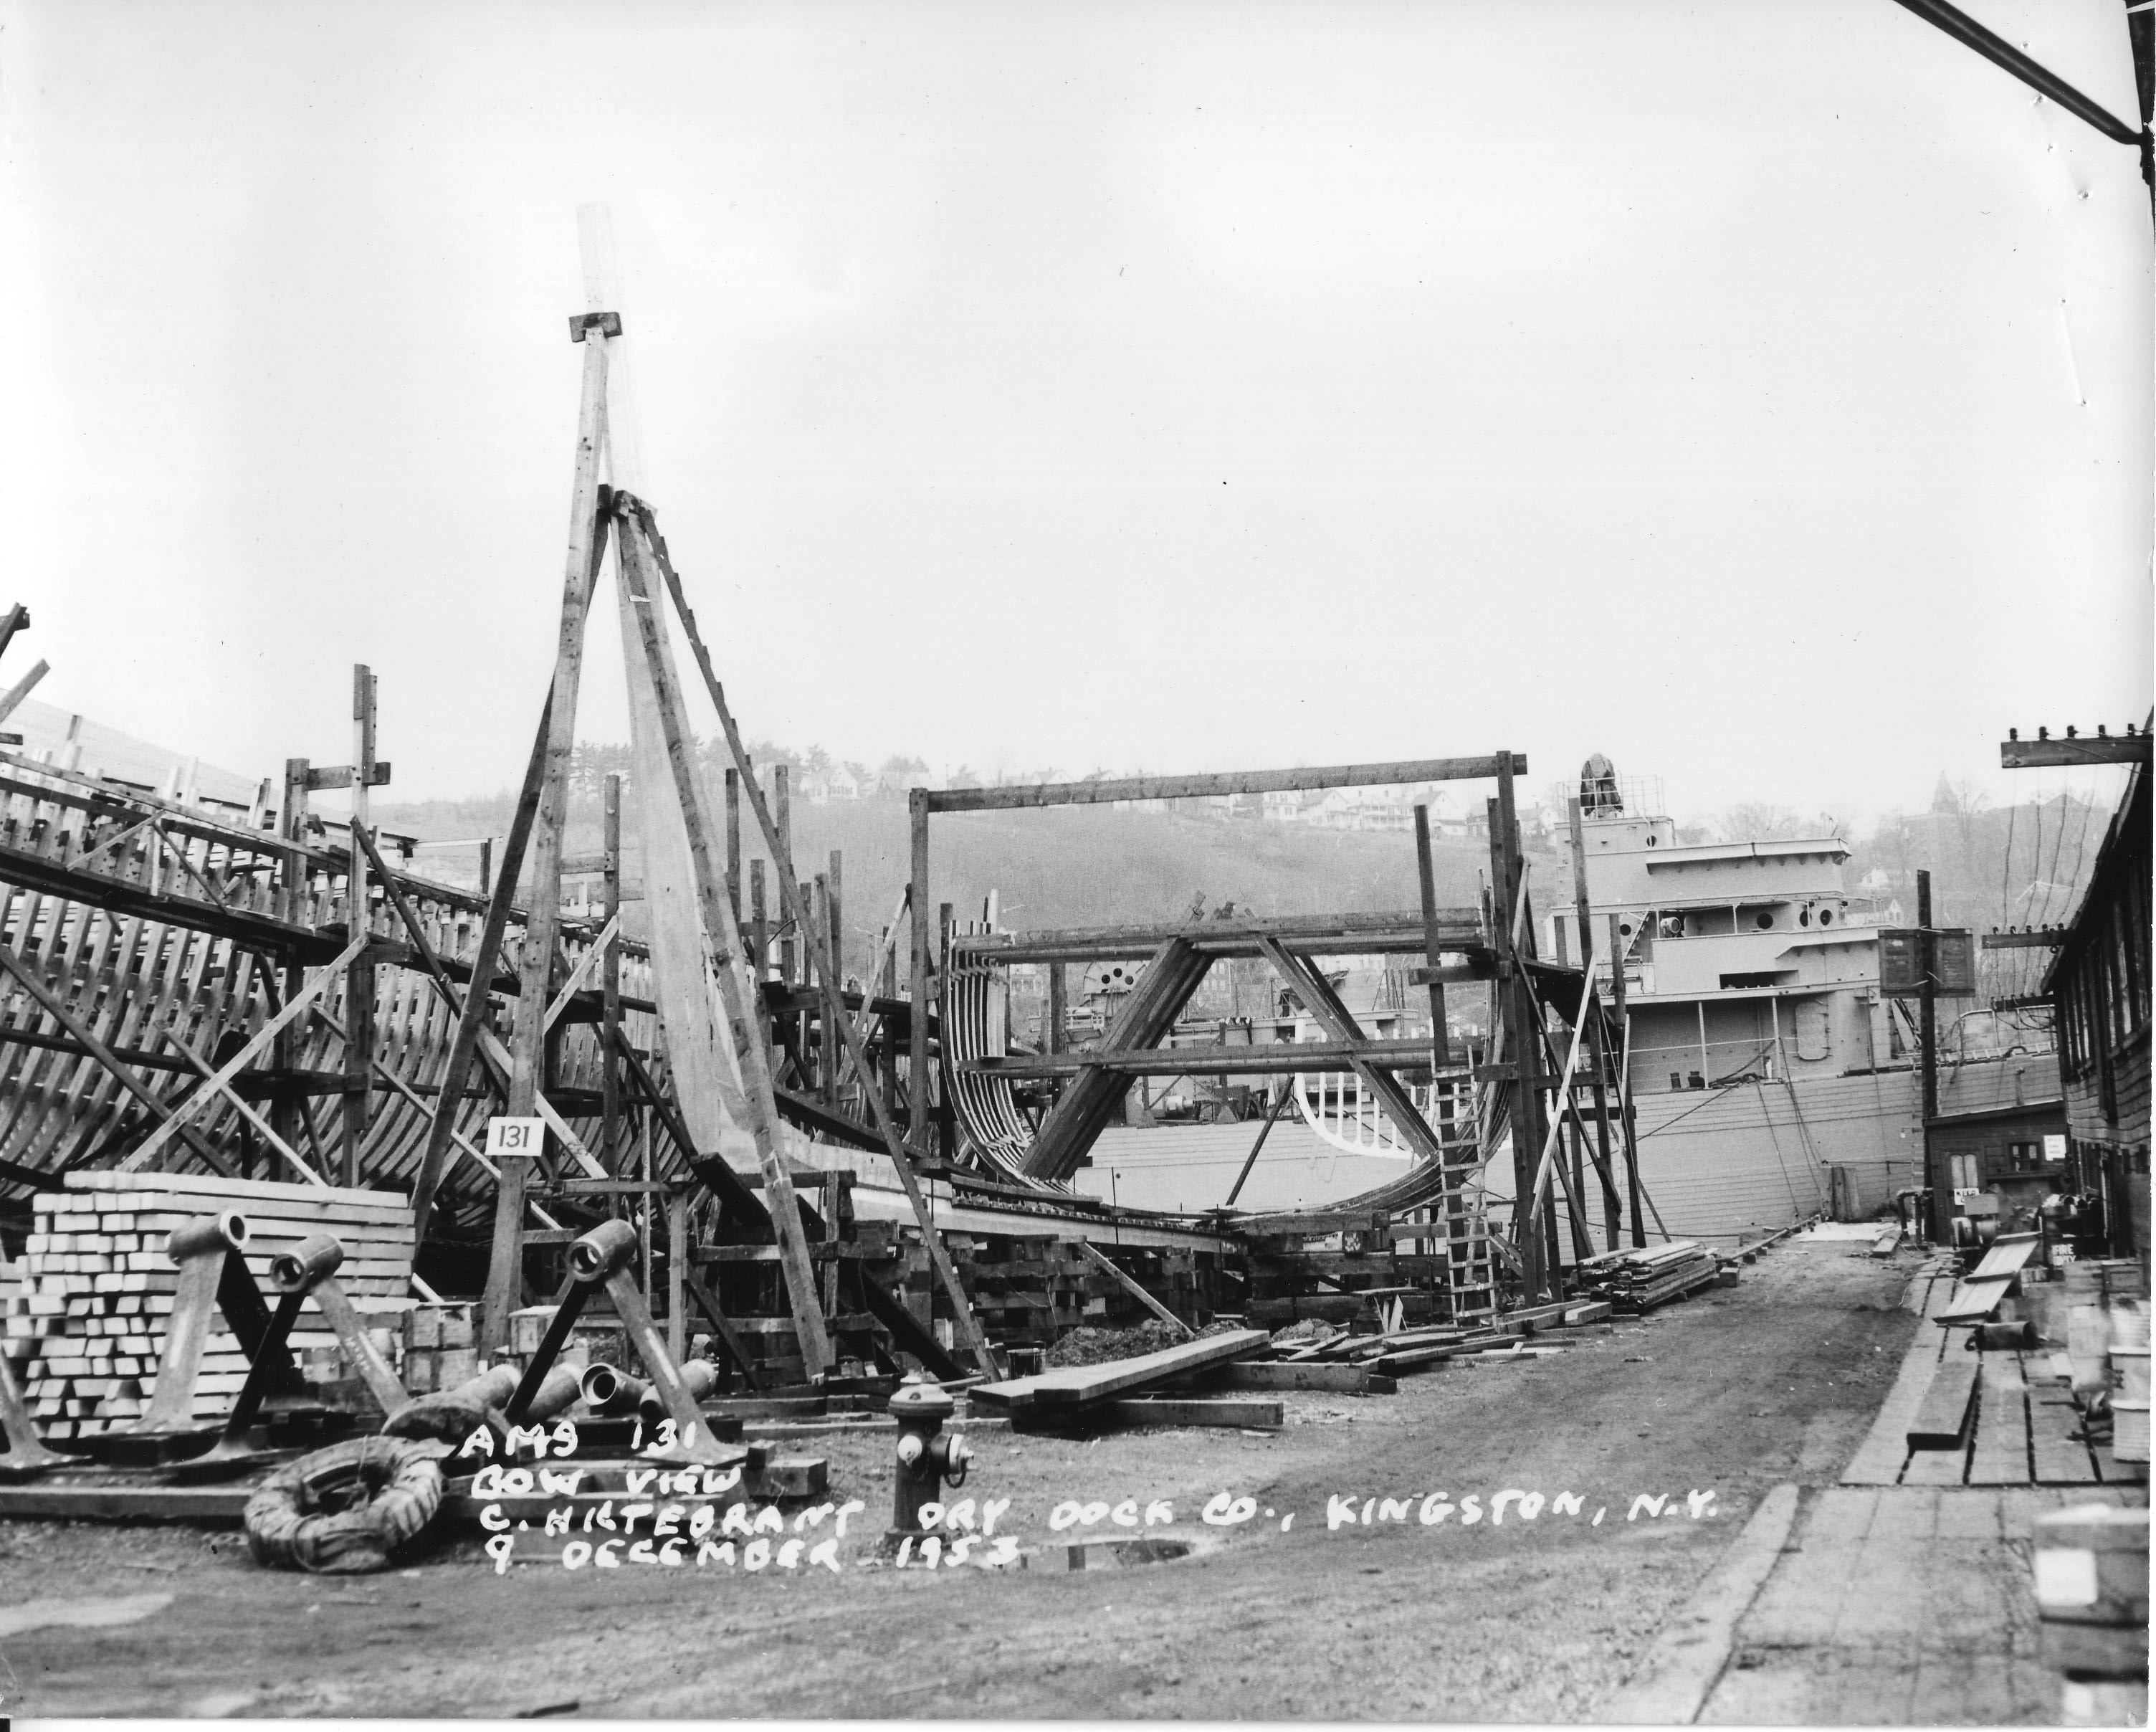 The minesweeper “AMS 131” is being built at C. Hiltebrant Dry Dock Company, Kingston, 9 December 1953. Wooden boat building along the Rondout Creek in the 1950s experienced an unexpected boom. The United States Navy used wooden minesweepers to deactivate magnetic mines throughout the Korean War. Today, wooden boat building is taught to high school students in the Hudson River Maritime Museum’s YouthBoat program. HRMM Collection